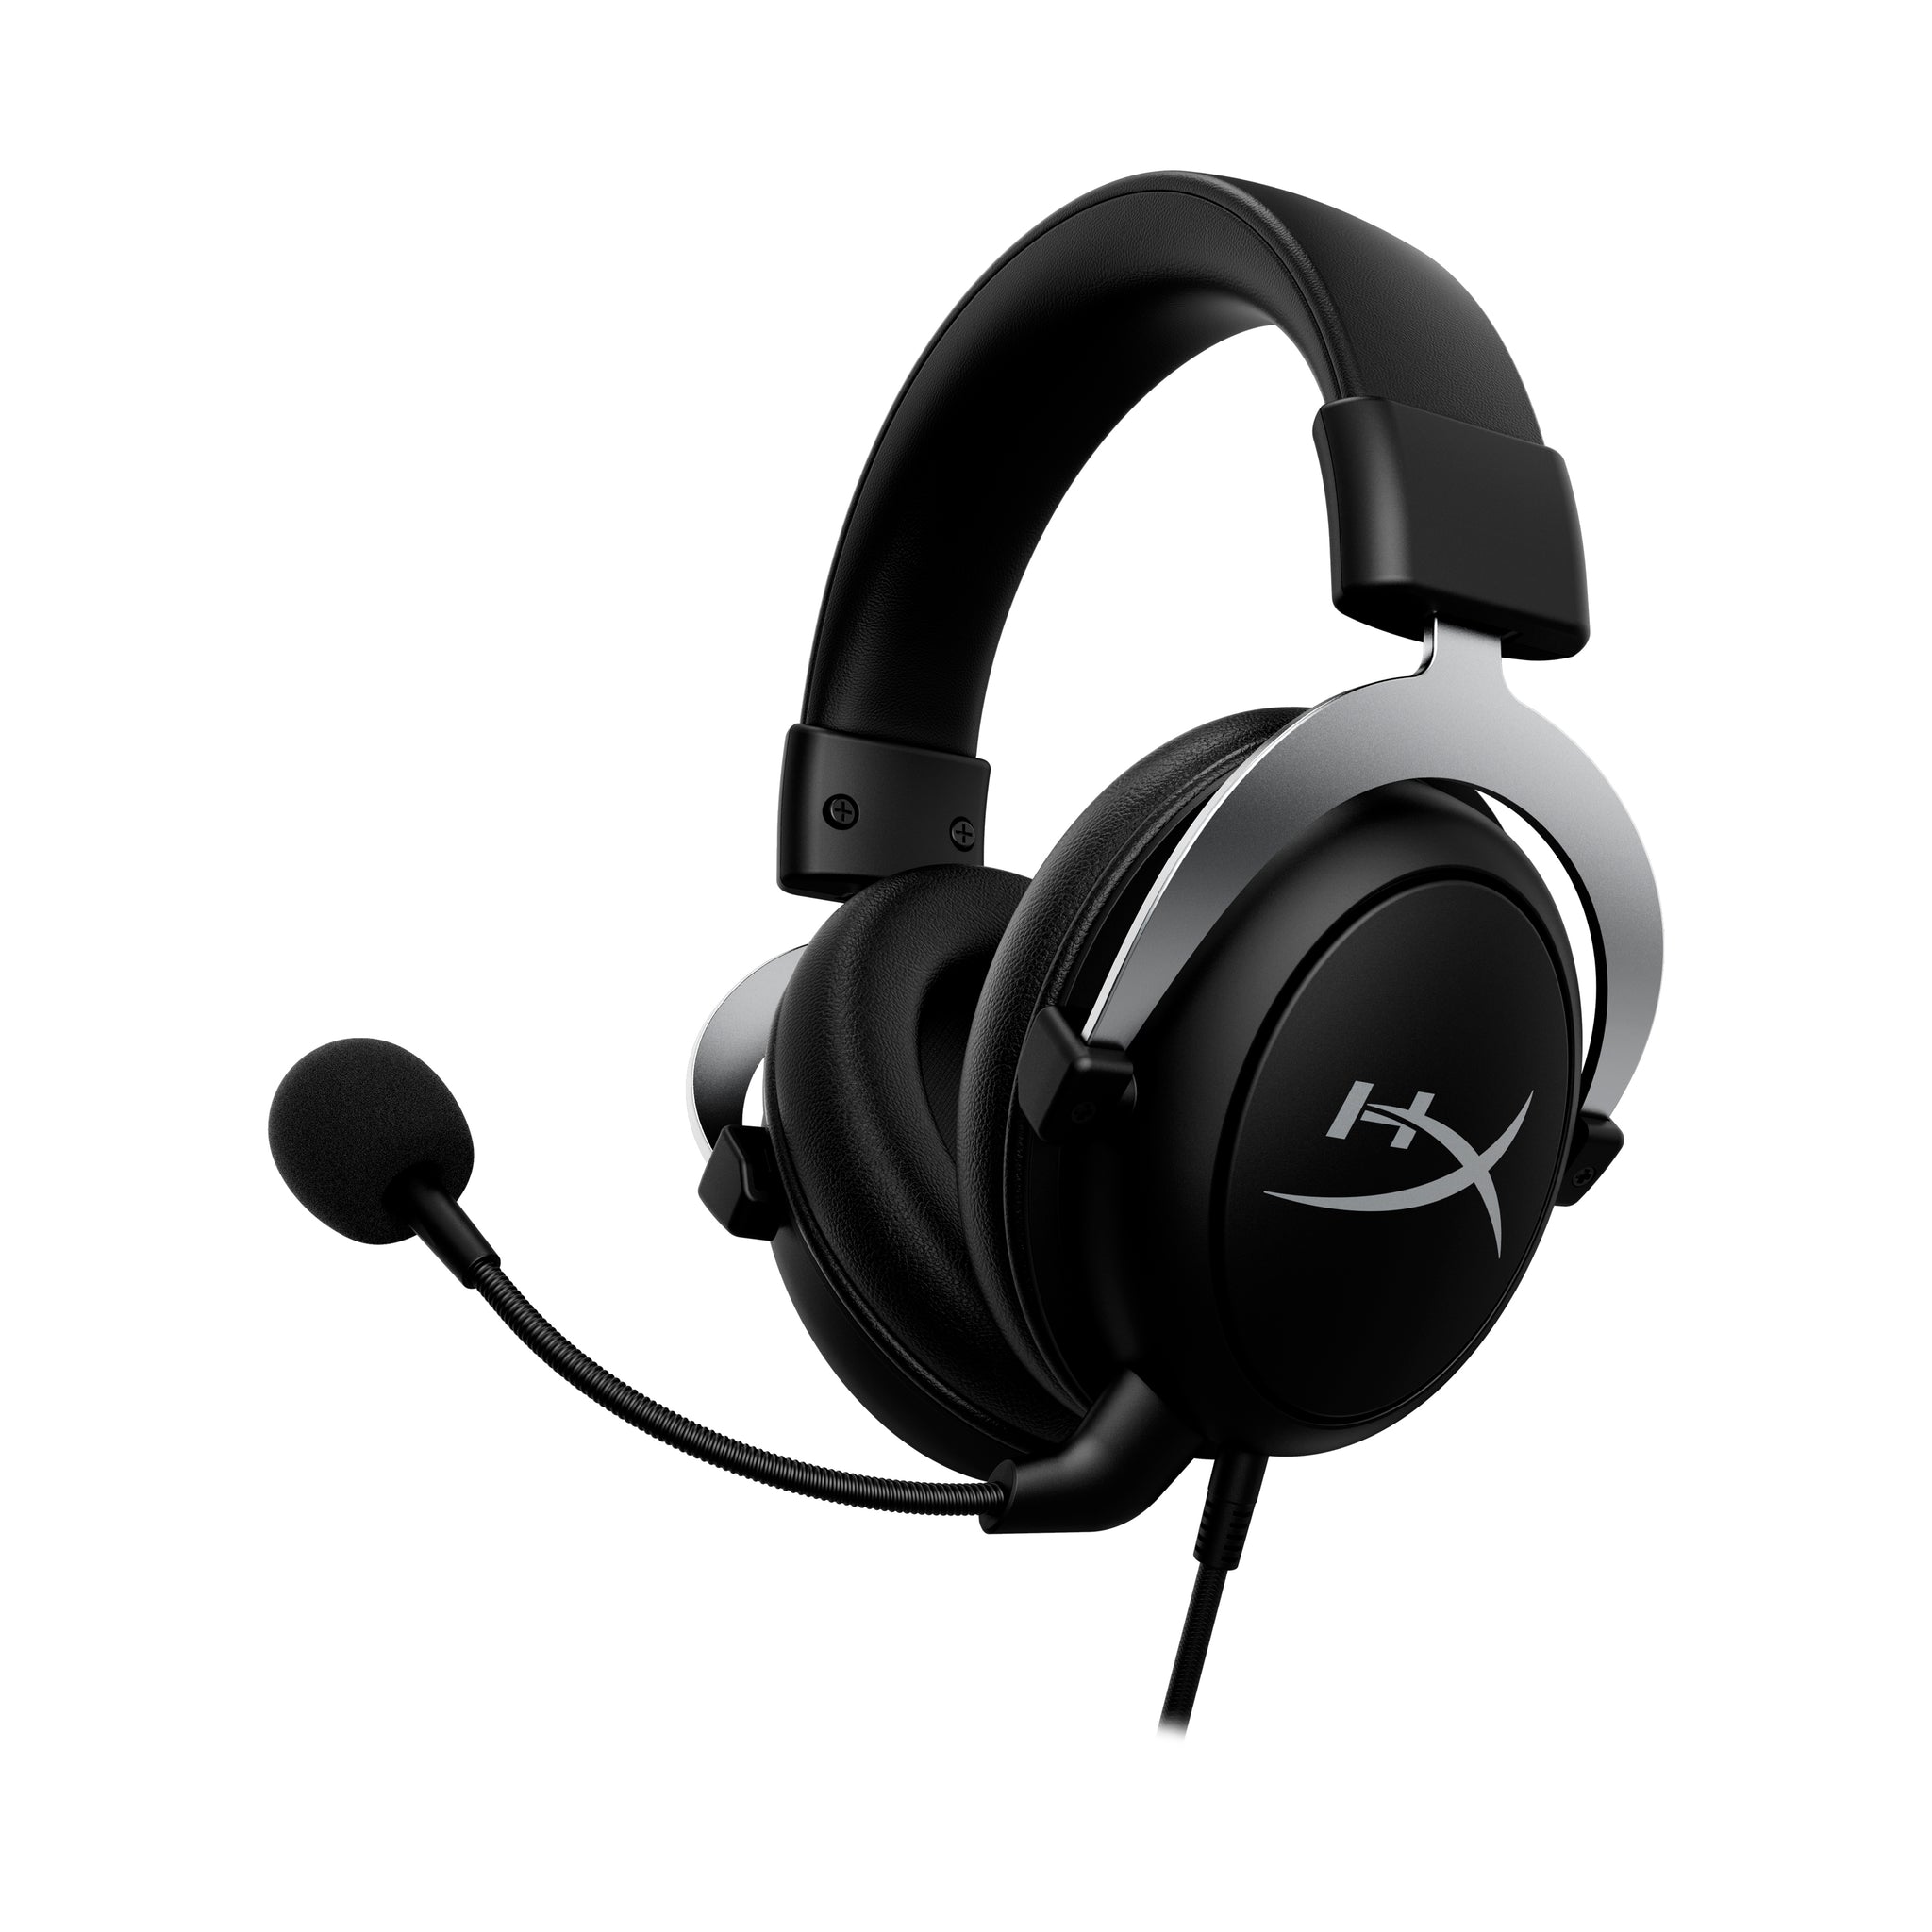 HyperX CloudX gaming headset for Xbox displaying front left hand side displaying detachable microphone